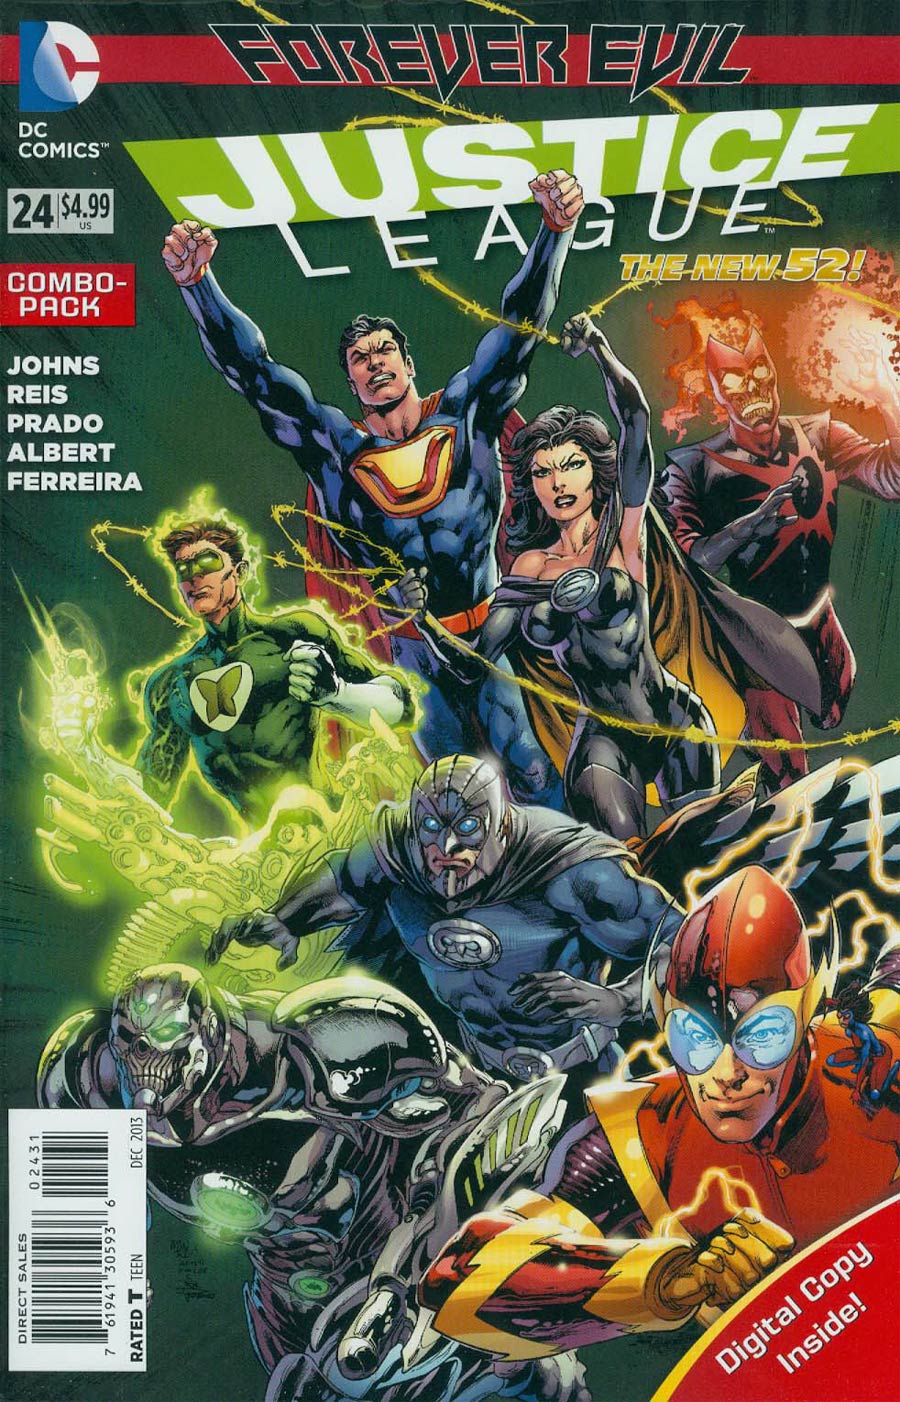 Justice League Vol 2 #24 Cover C Combo Pack Without Polybag (Forever Evil Tie-In)